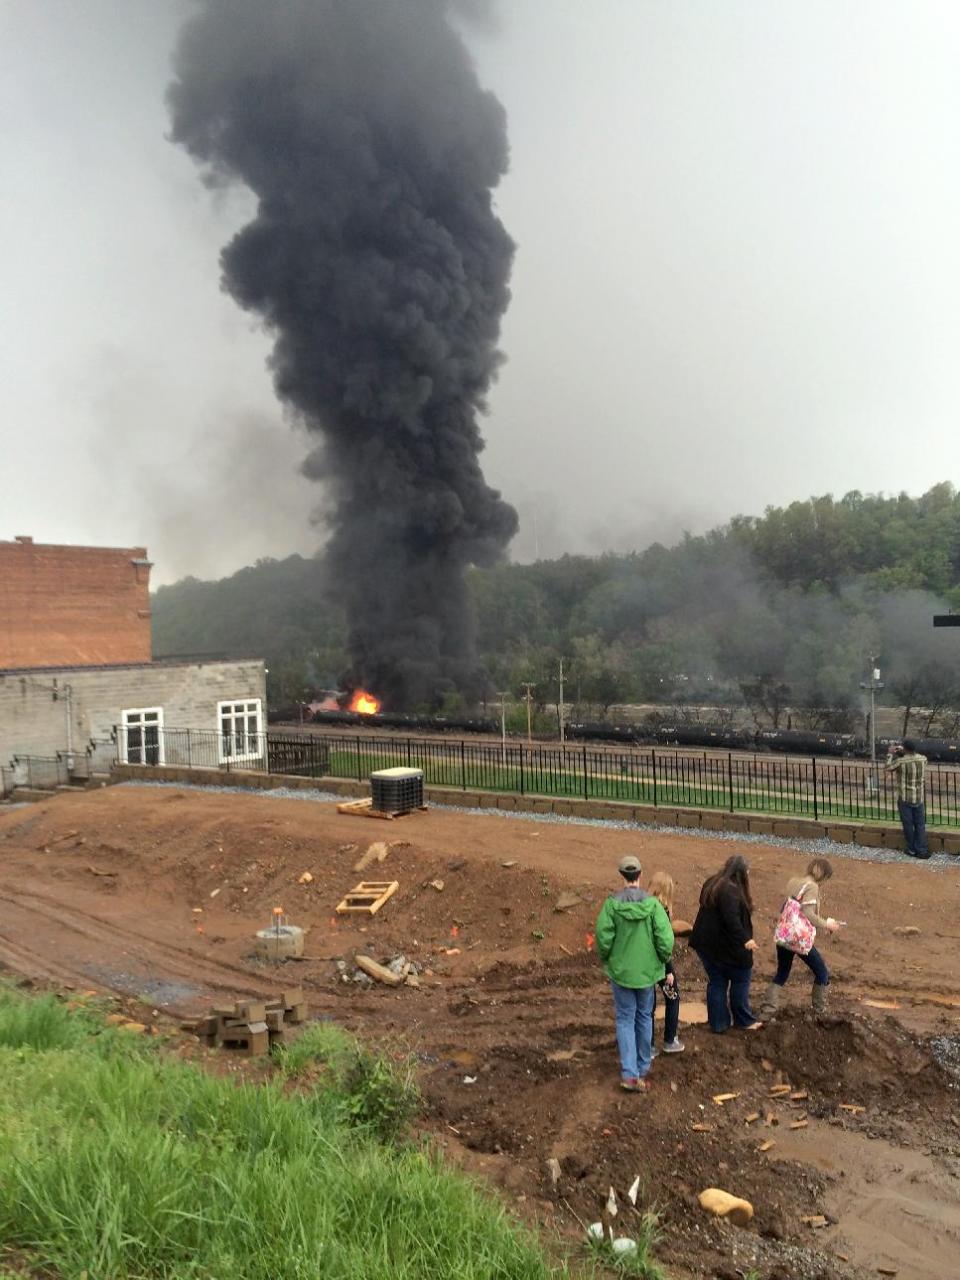 In this mobile phone photo provided Charles Peters, people look on as smoke rises after several CSX tanker cars carrying crude oil derailed on Wednesday, April 30, 2014, in Lynchburg, Va. Authorities evacuated numerous buildings Wednesday after the derailment. (AP Photo/Charles Peters) MANDATORY CREDIT